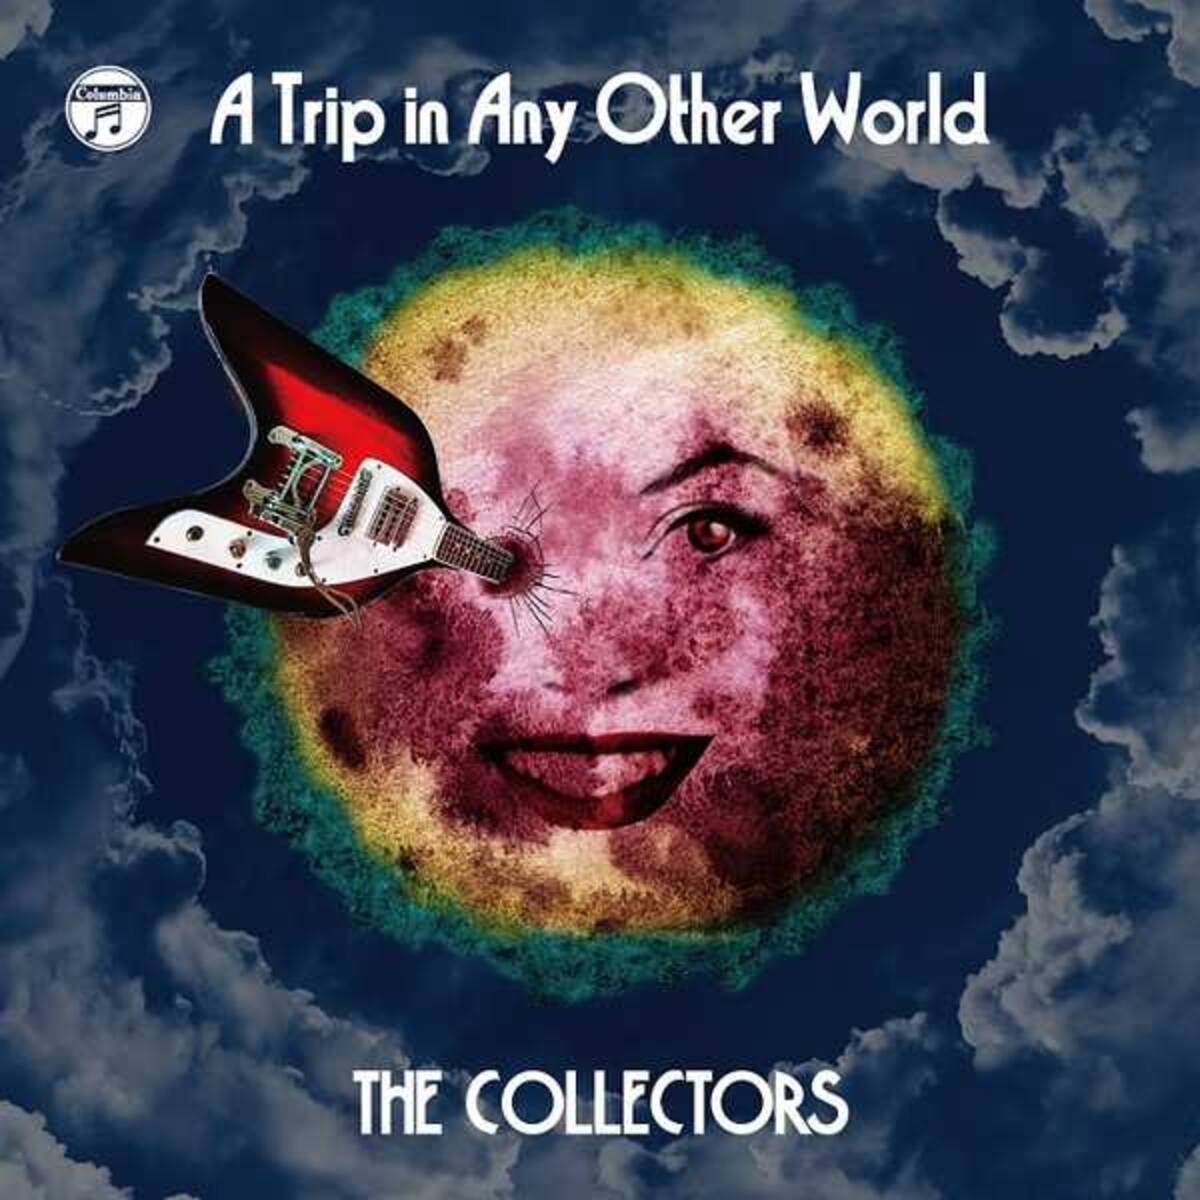 The Collectors アルバム 別世界旅行 A Trip In Any Other World の全貌を解禁 年10月23日 エキサイトニュース